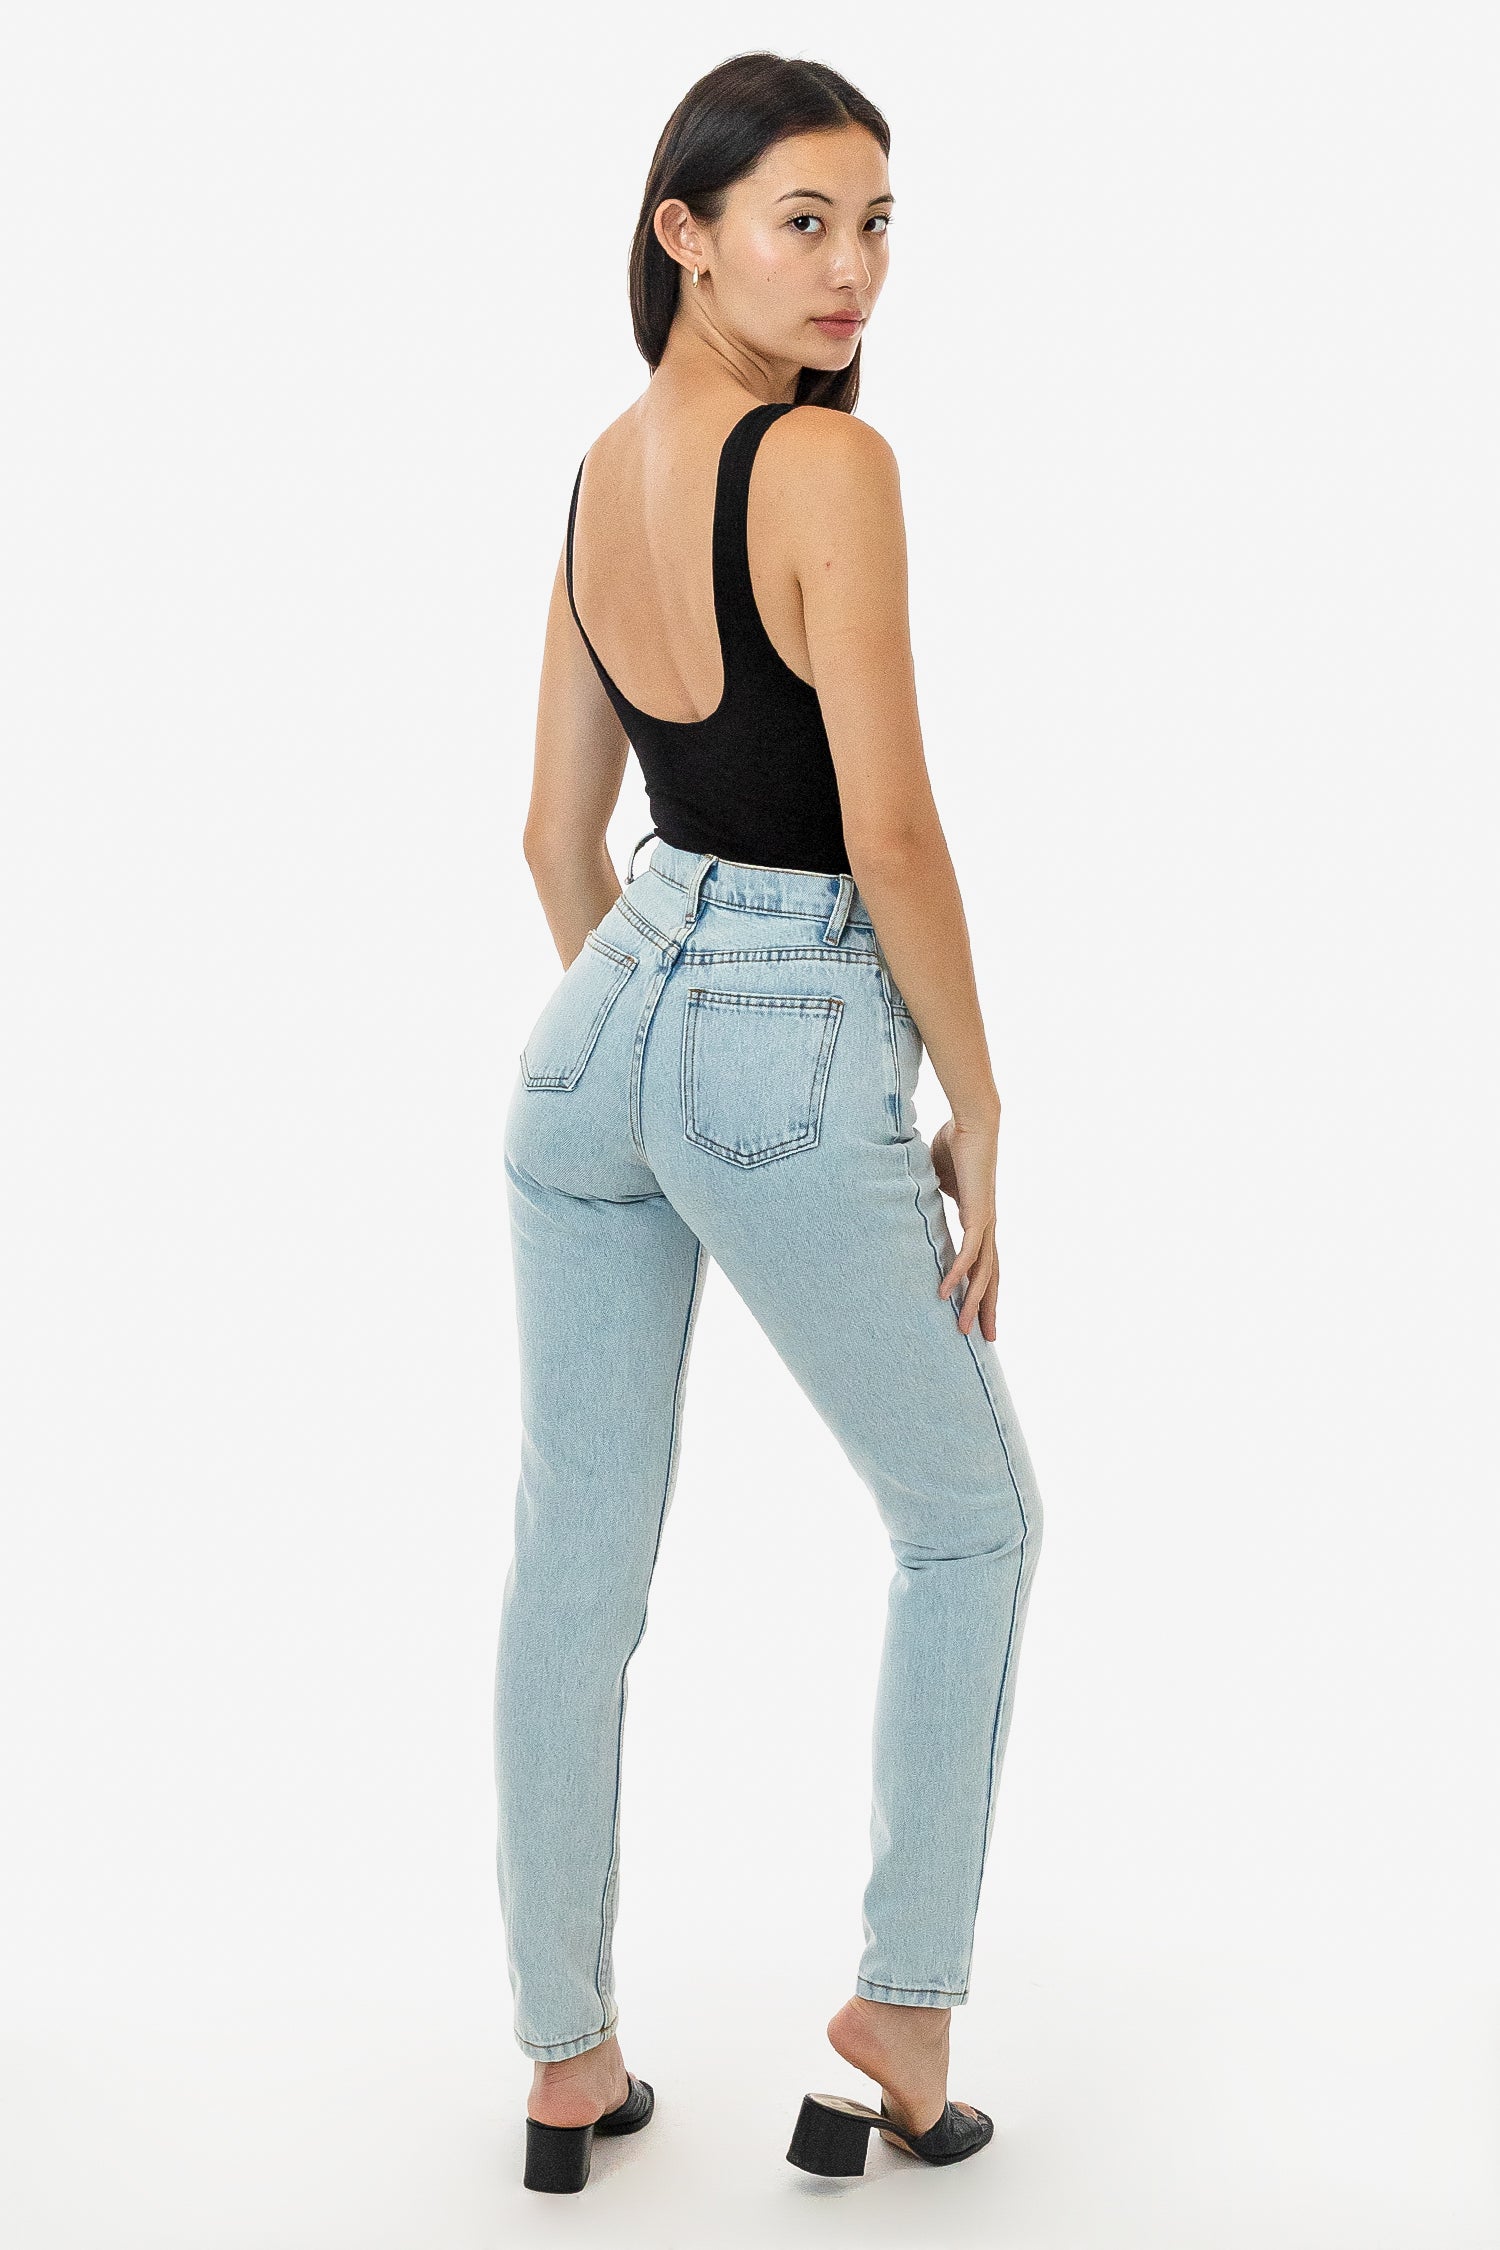 RDNW701 - High Waisted Tapered Jean